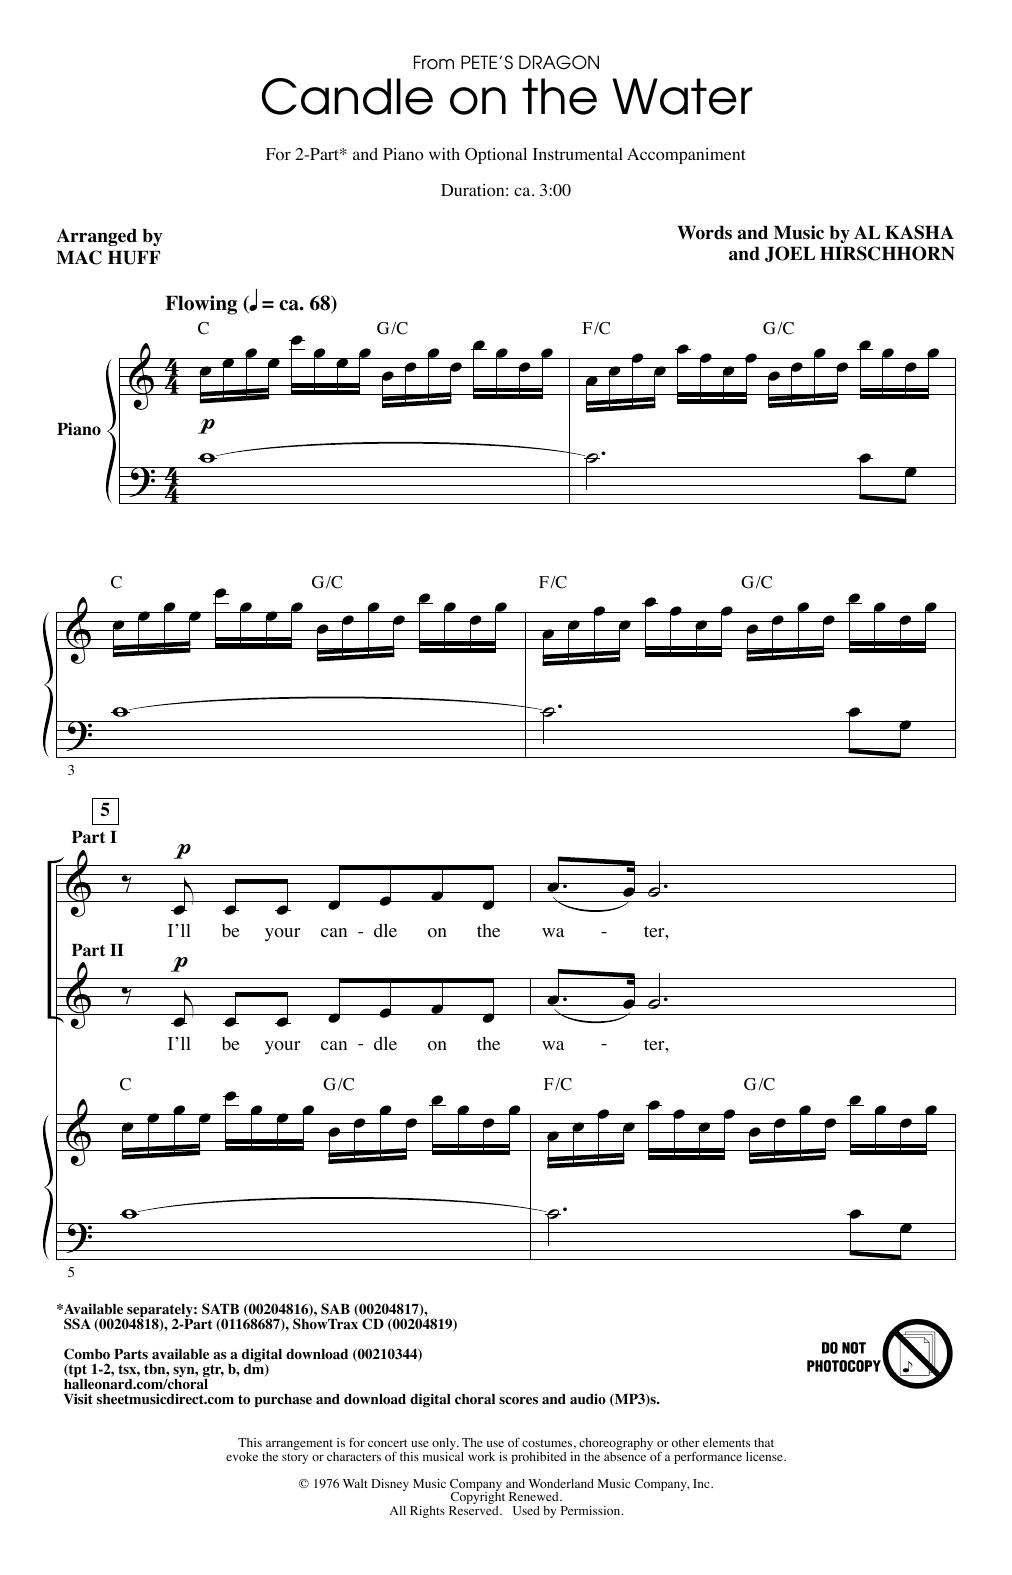 Al Kasha & Joel Hirschhorn Candle On The Water (from Pete's Dragon) (arr. Mac Huff) sheet music notes printable PDF score